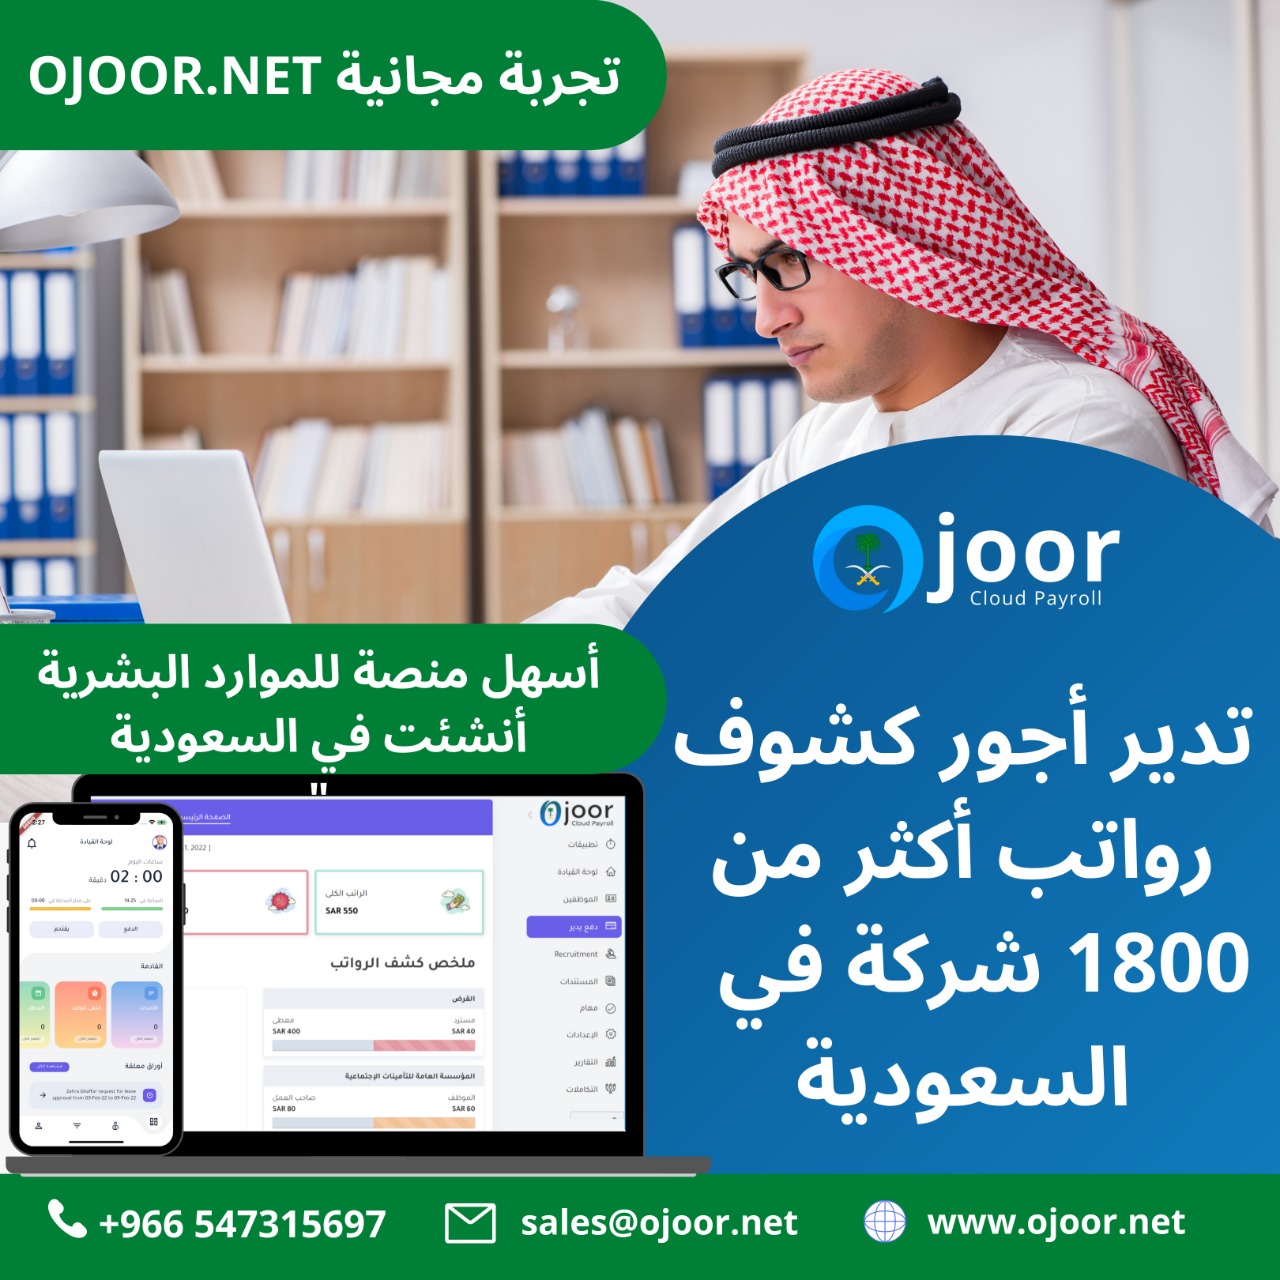 What Kind Of Features Needs in Payroll System in Saudi?